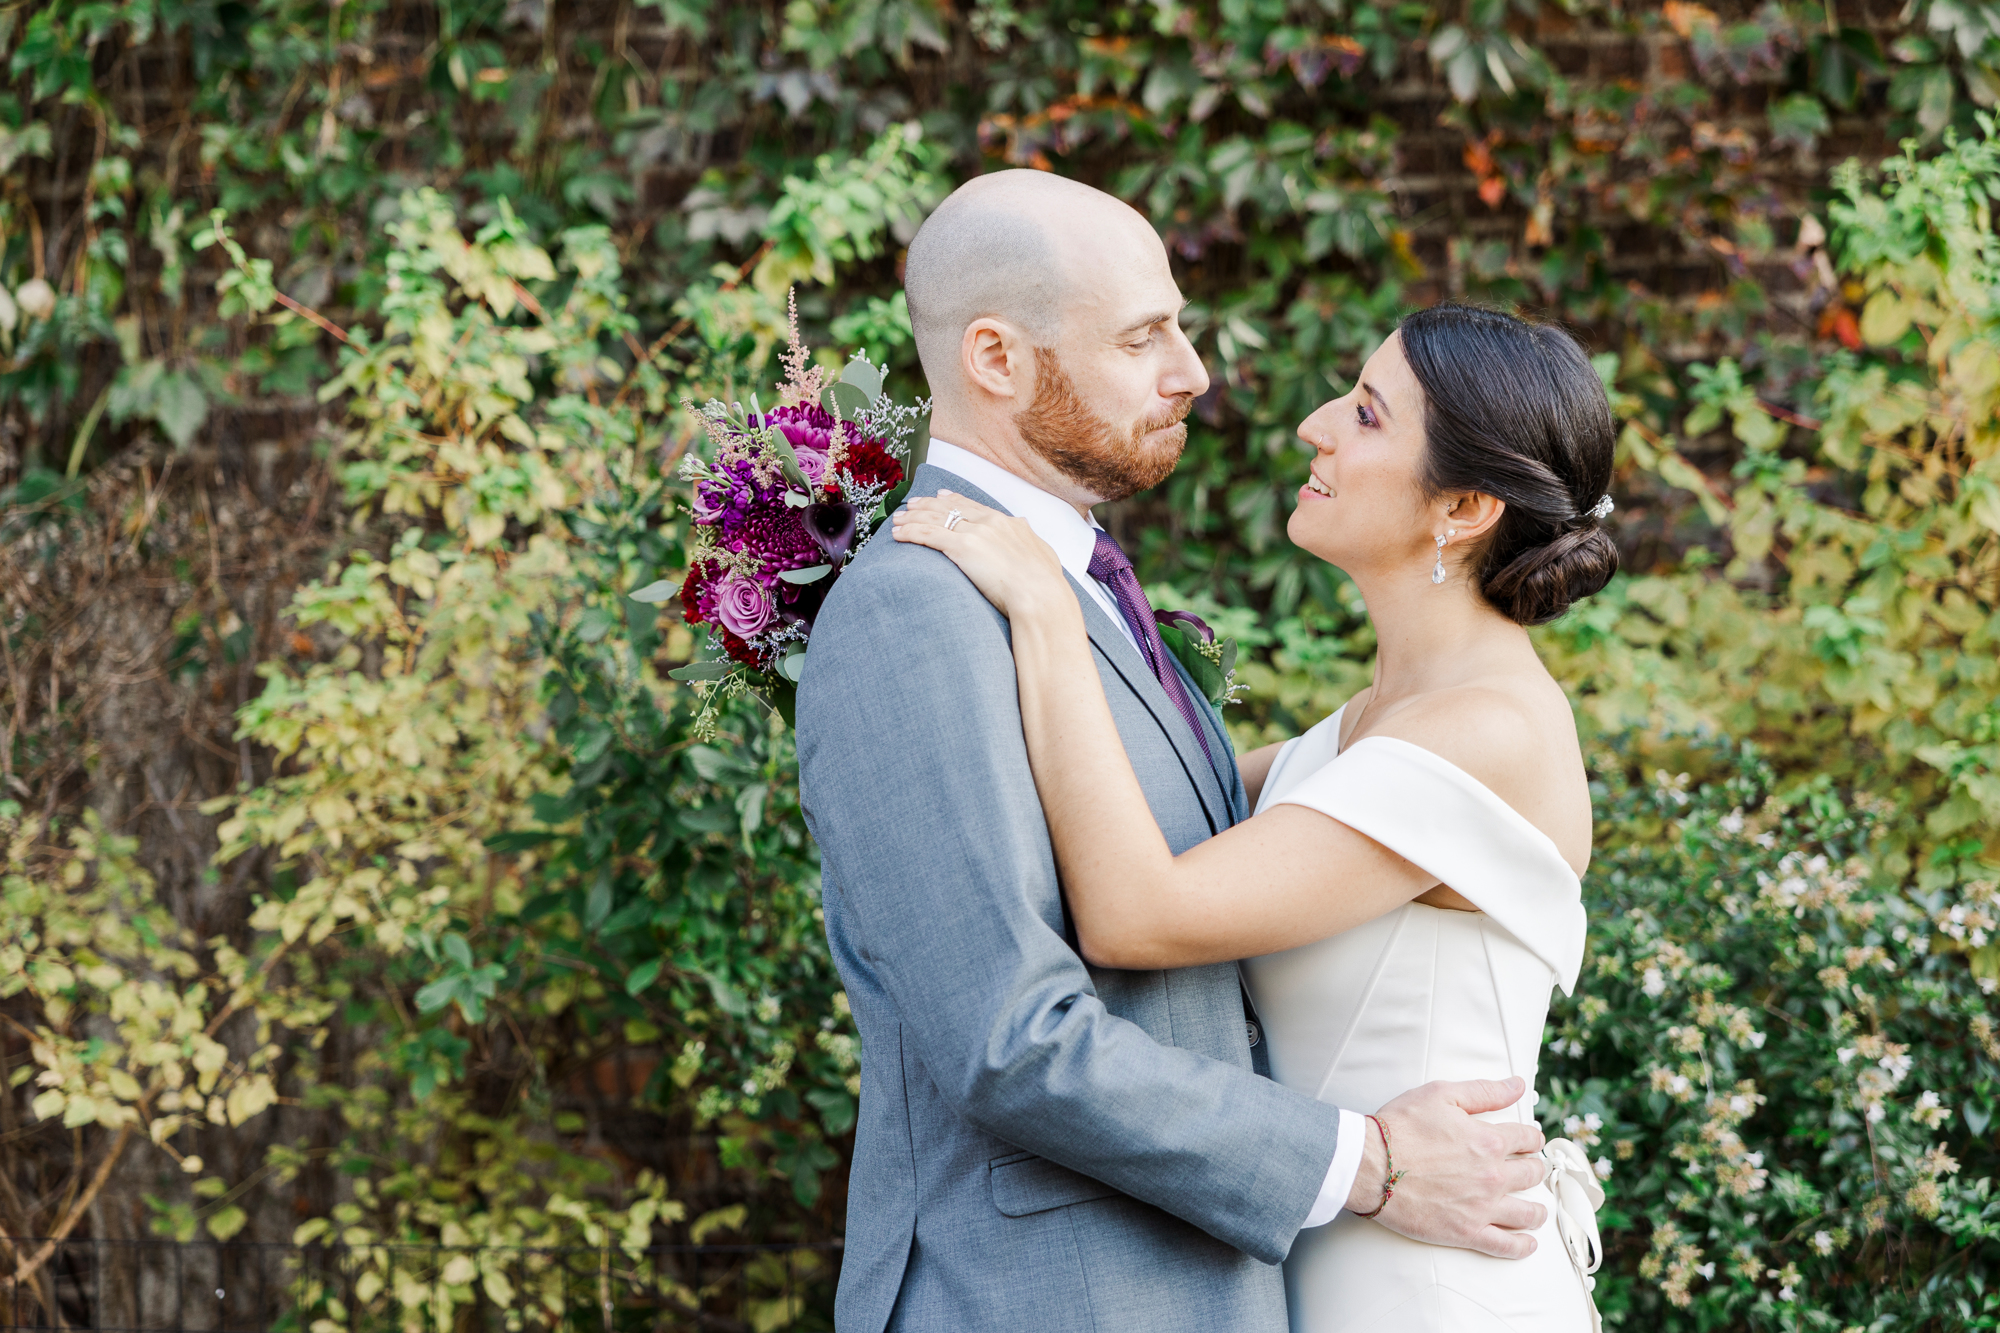 Authentic Wedding Photos at Greenpoint Loft in Brooklyn